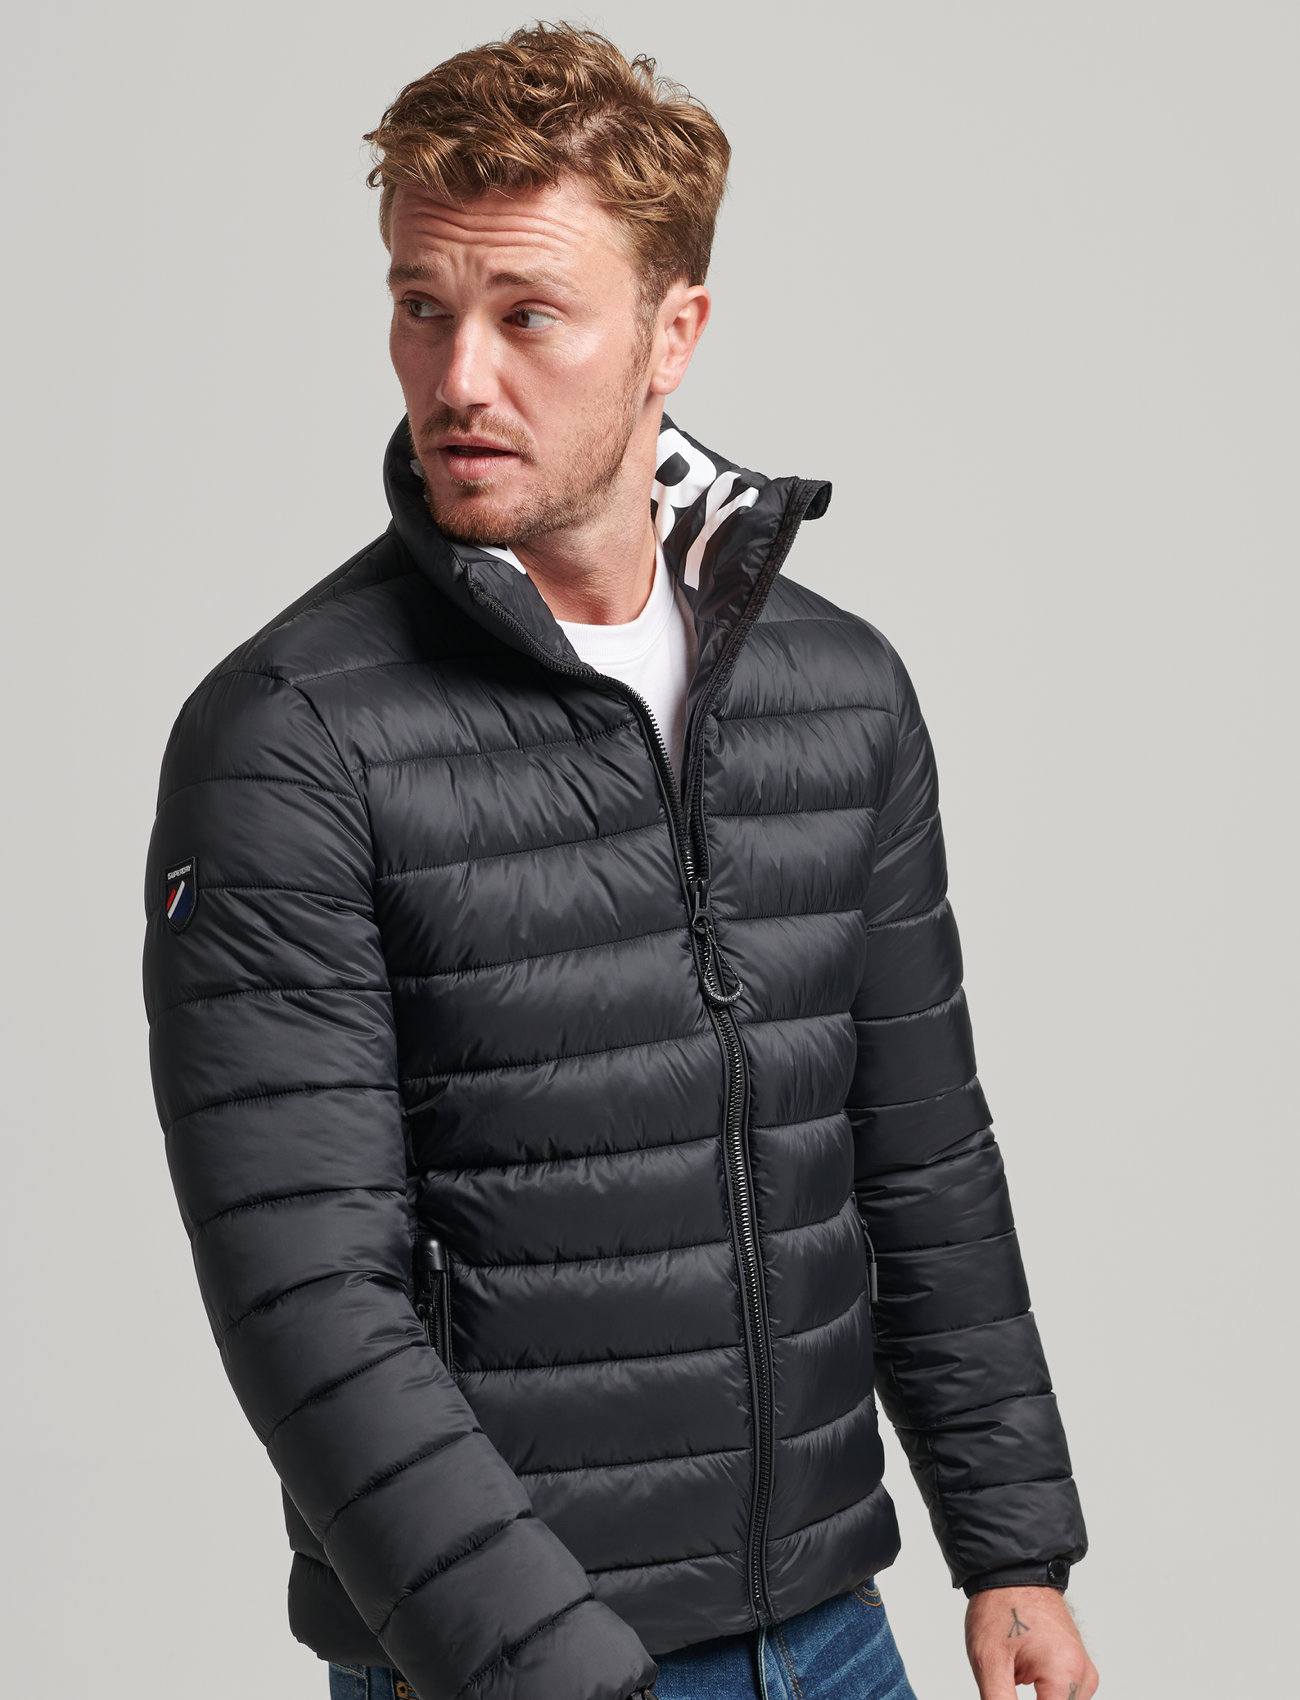 Mtn Buy returns Jkt from Fuji jackets Code Hood and online easy Fast Superdry 99.99 at €. delivery - Boozt.com. Superdry Padded Non